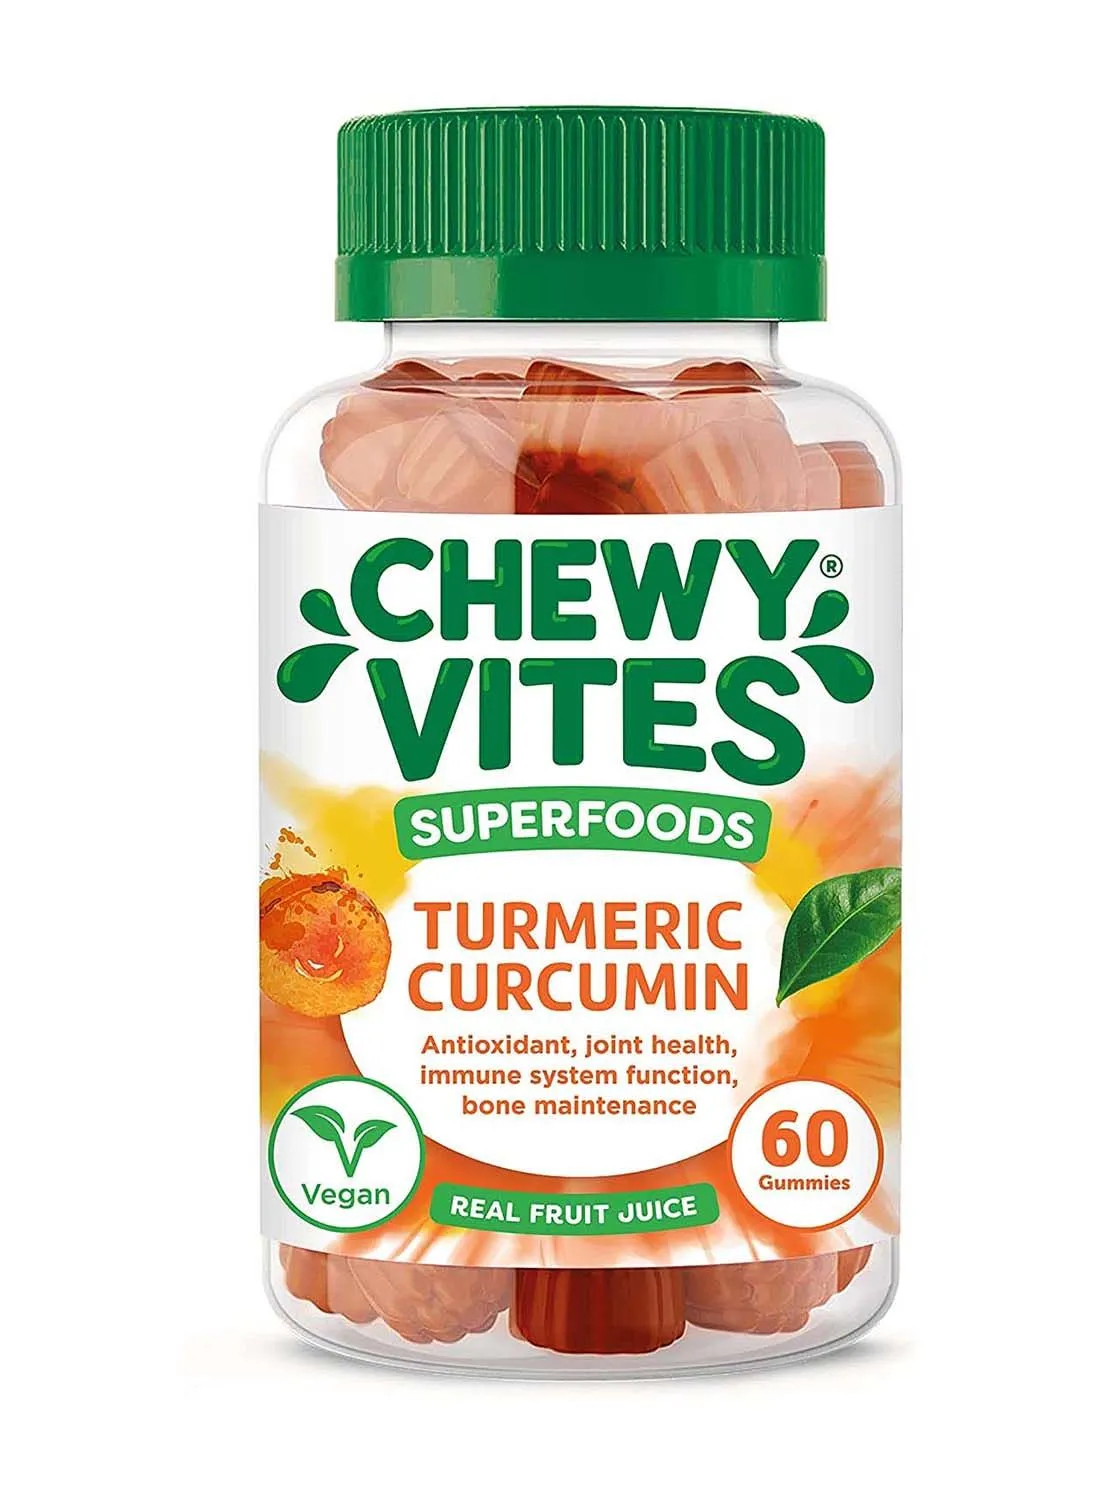 CHEWY VITES Chewy Vites Superfoods Turmeric Curcumin 60's